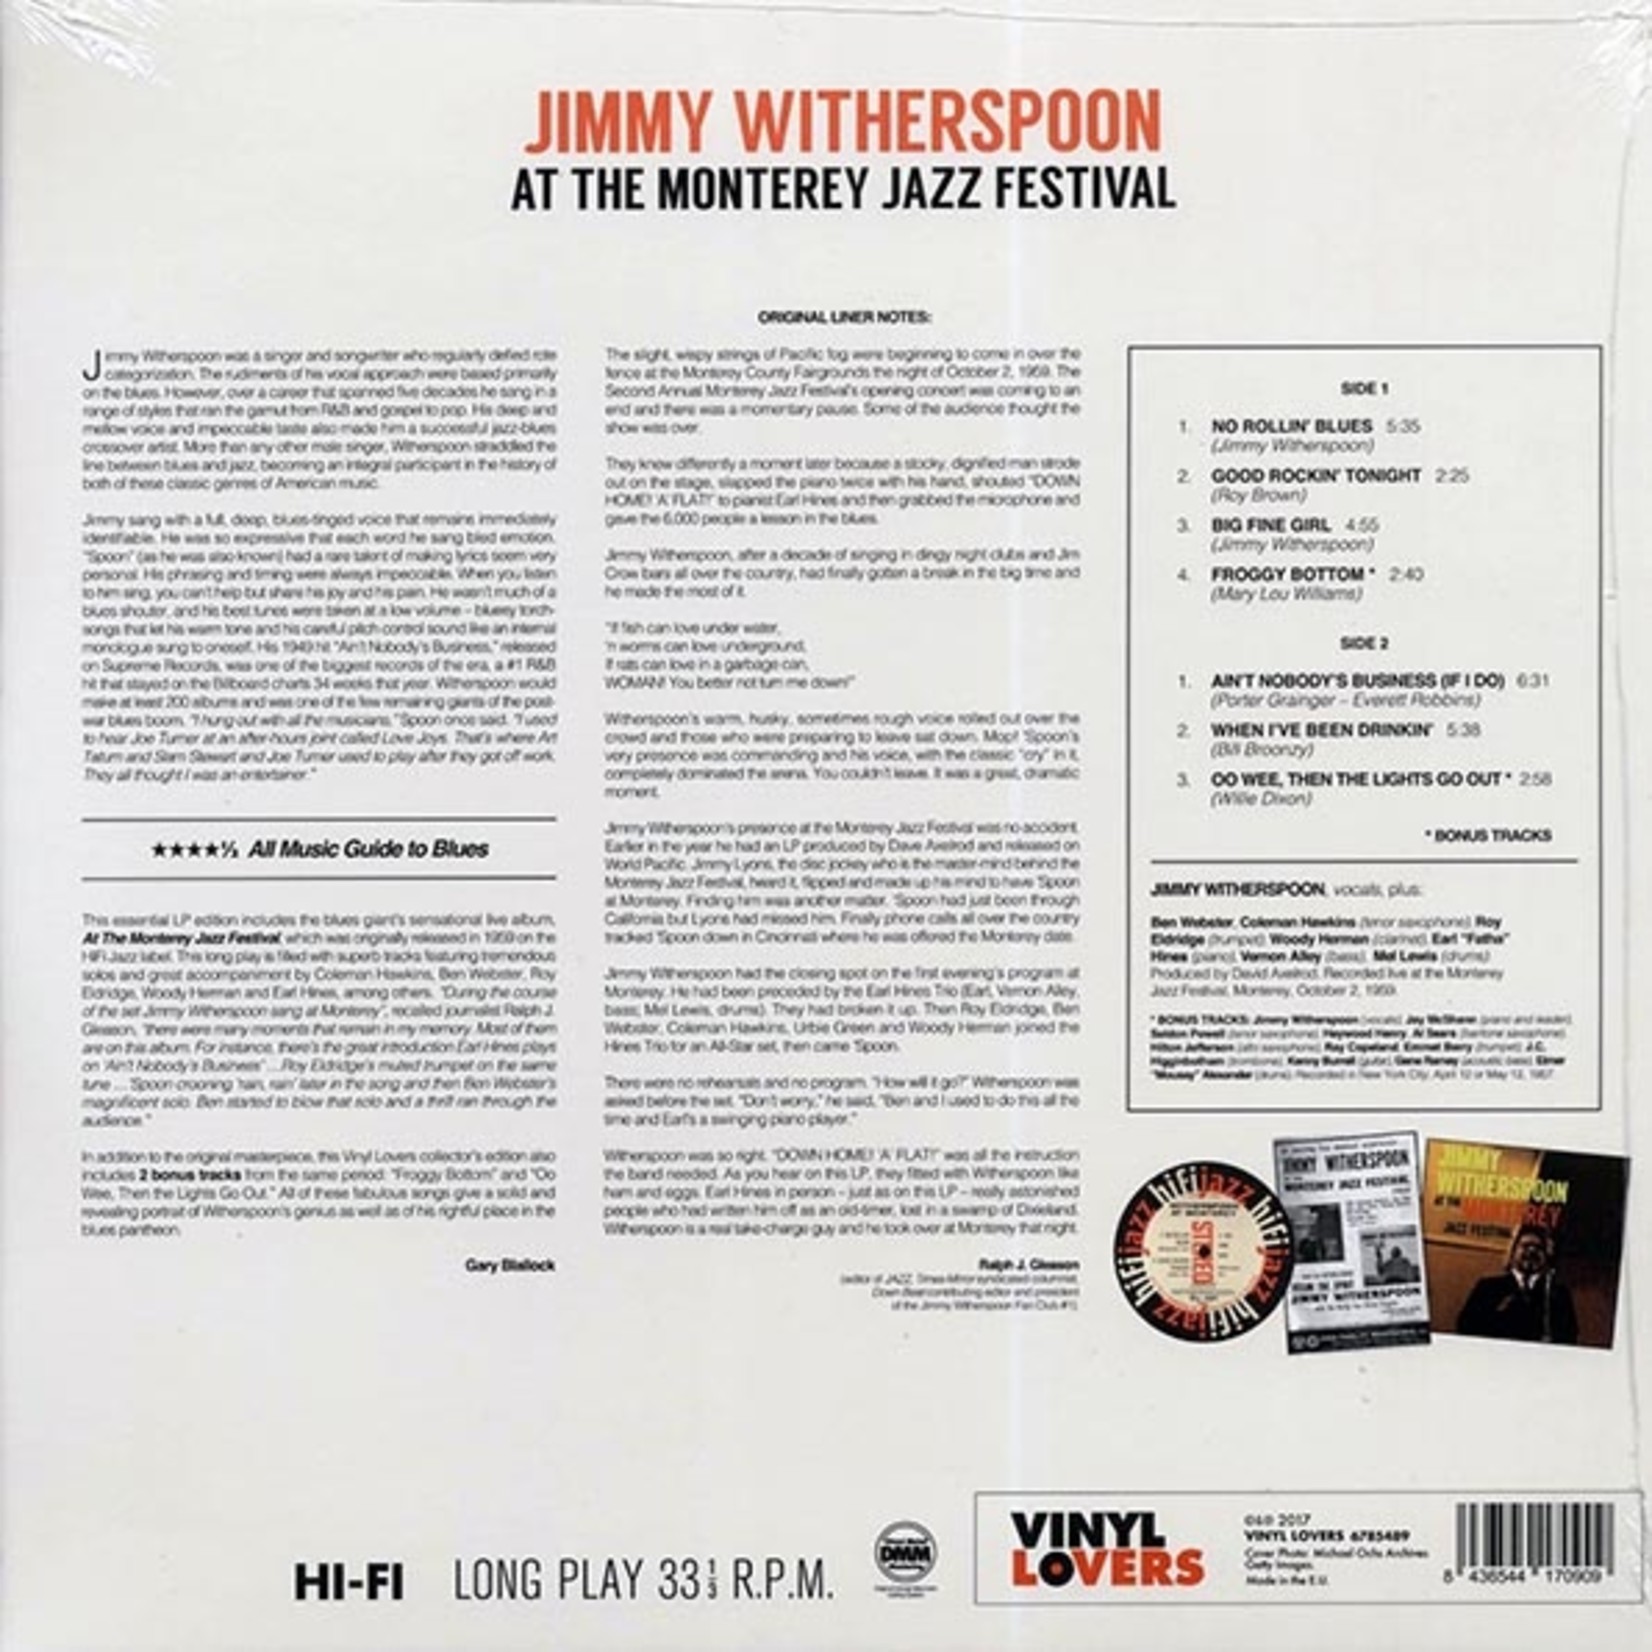 Jimmy Witherspoon - Live At The Monterey Jazz Festival (Vinyl Lovers) (Ltd.) (180g) (High-Def VV)